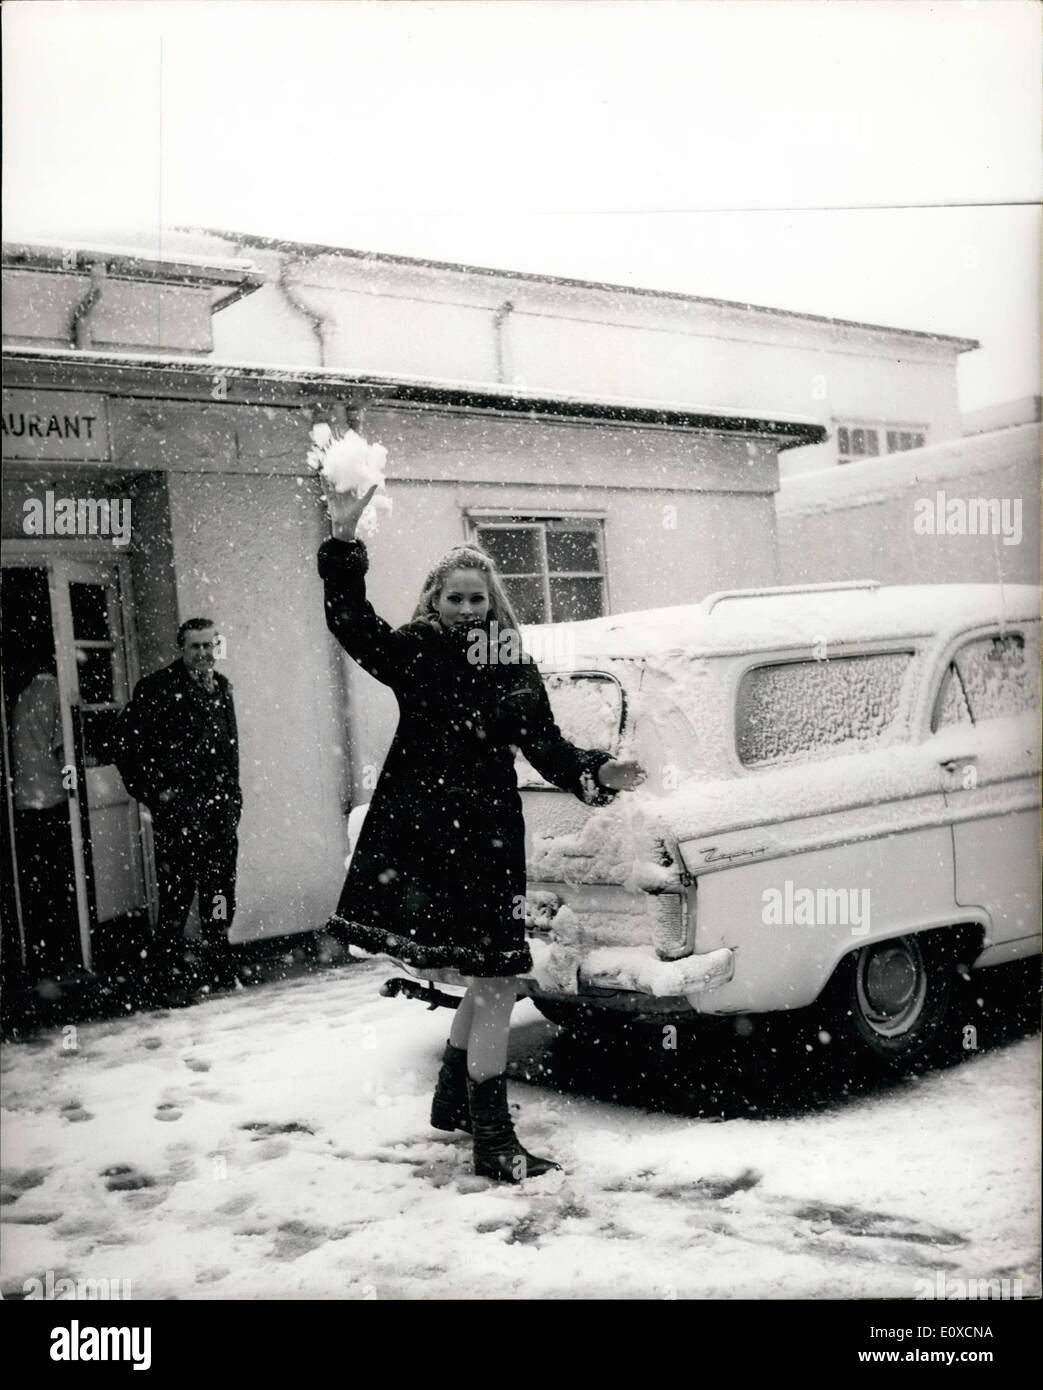 Apr. 04, 1966 - Star in the April show: Snow greeted Ursula Andress last day of the filming of the new James Bond extravaganza ''Casino Royale'', so the Swiss born star took the chance to get in some last minute snowball practice. Next week, Ursula is off to the South Seas for her first holiday in five years. Stock Photo